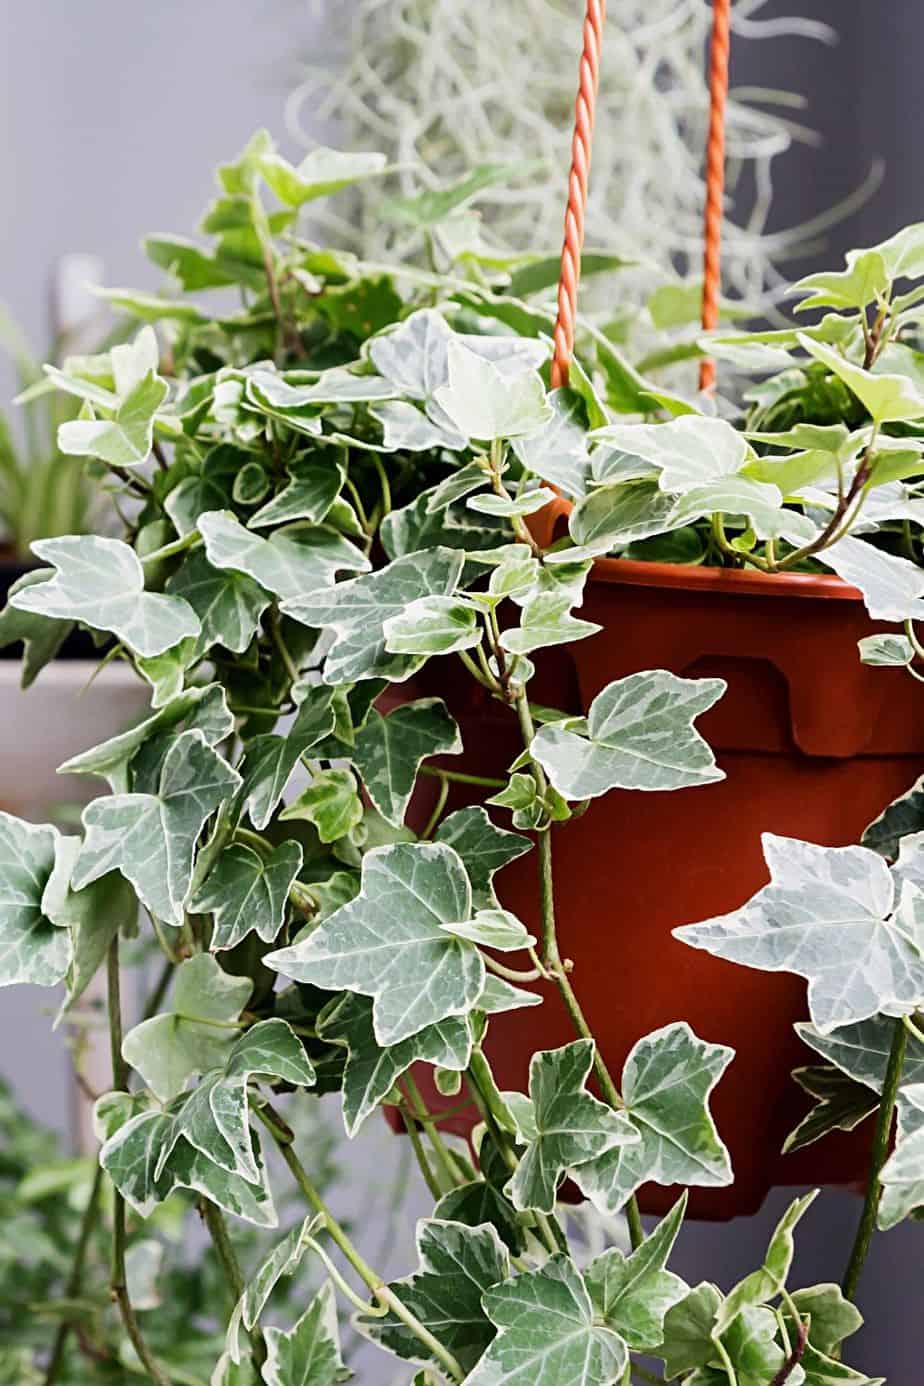 The leaves of the English Ivy are toxic for your cats